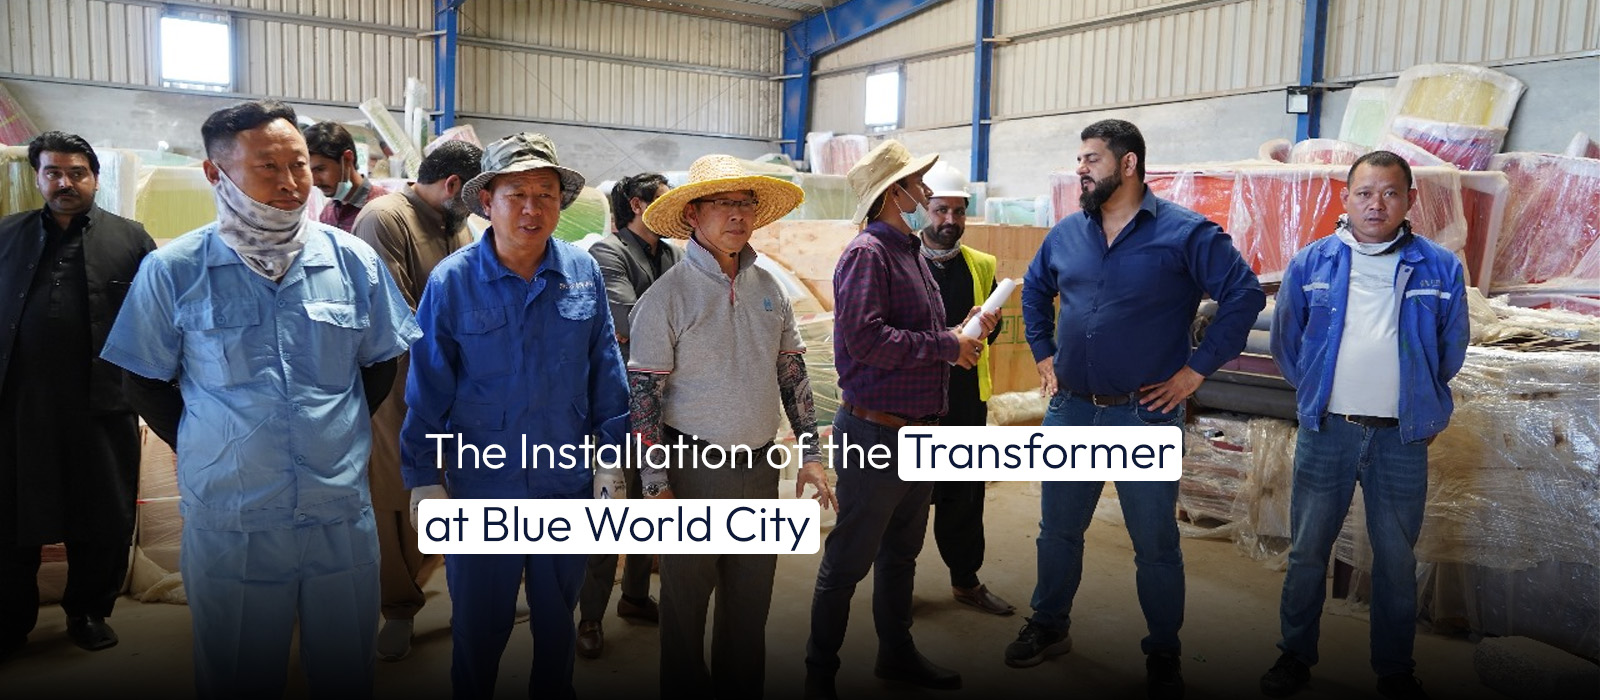 The Installation of the Transformer at Blue World City